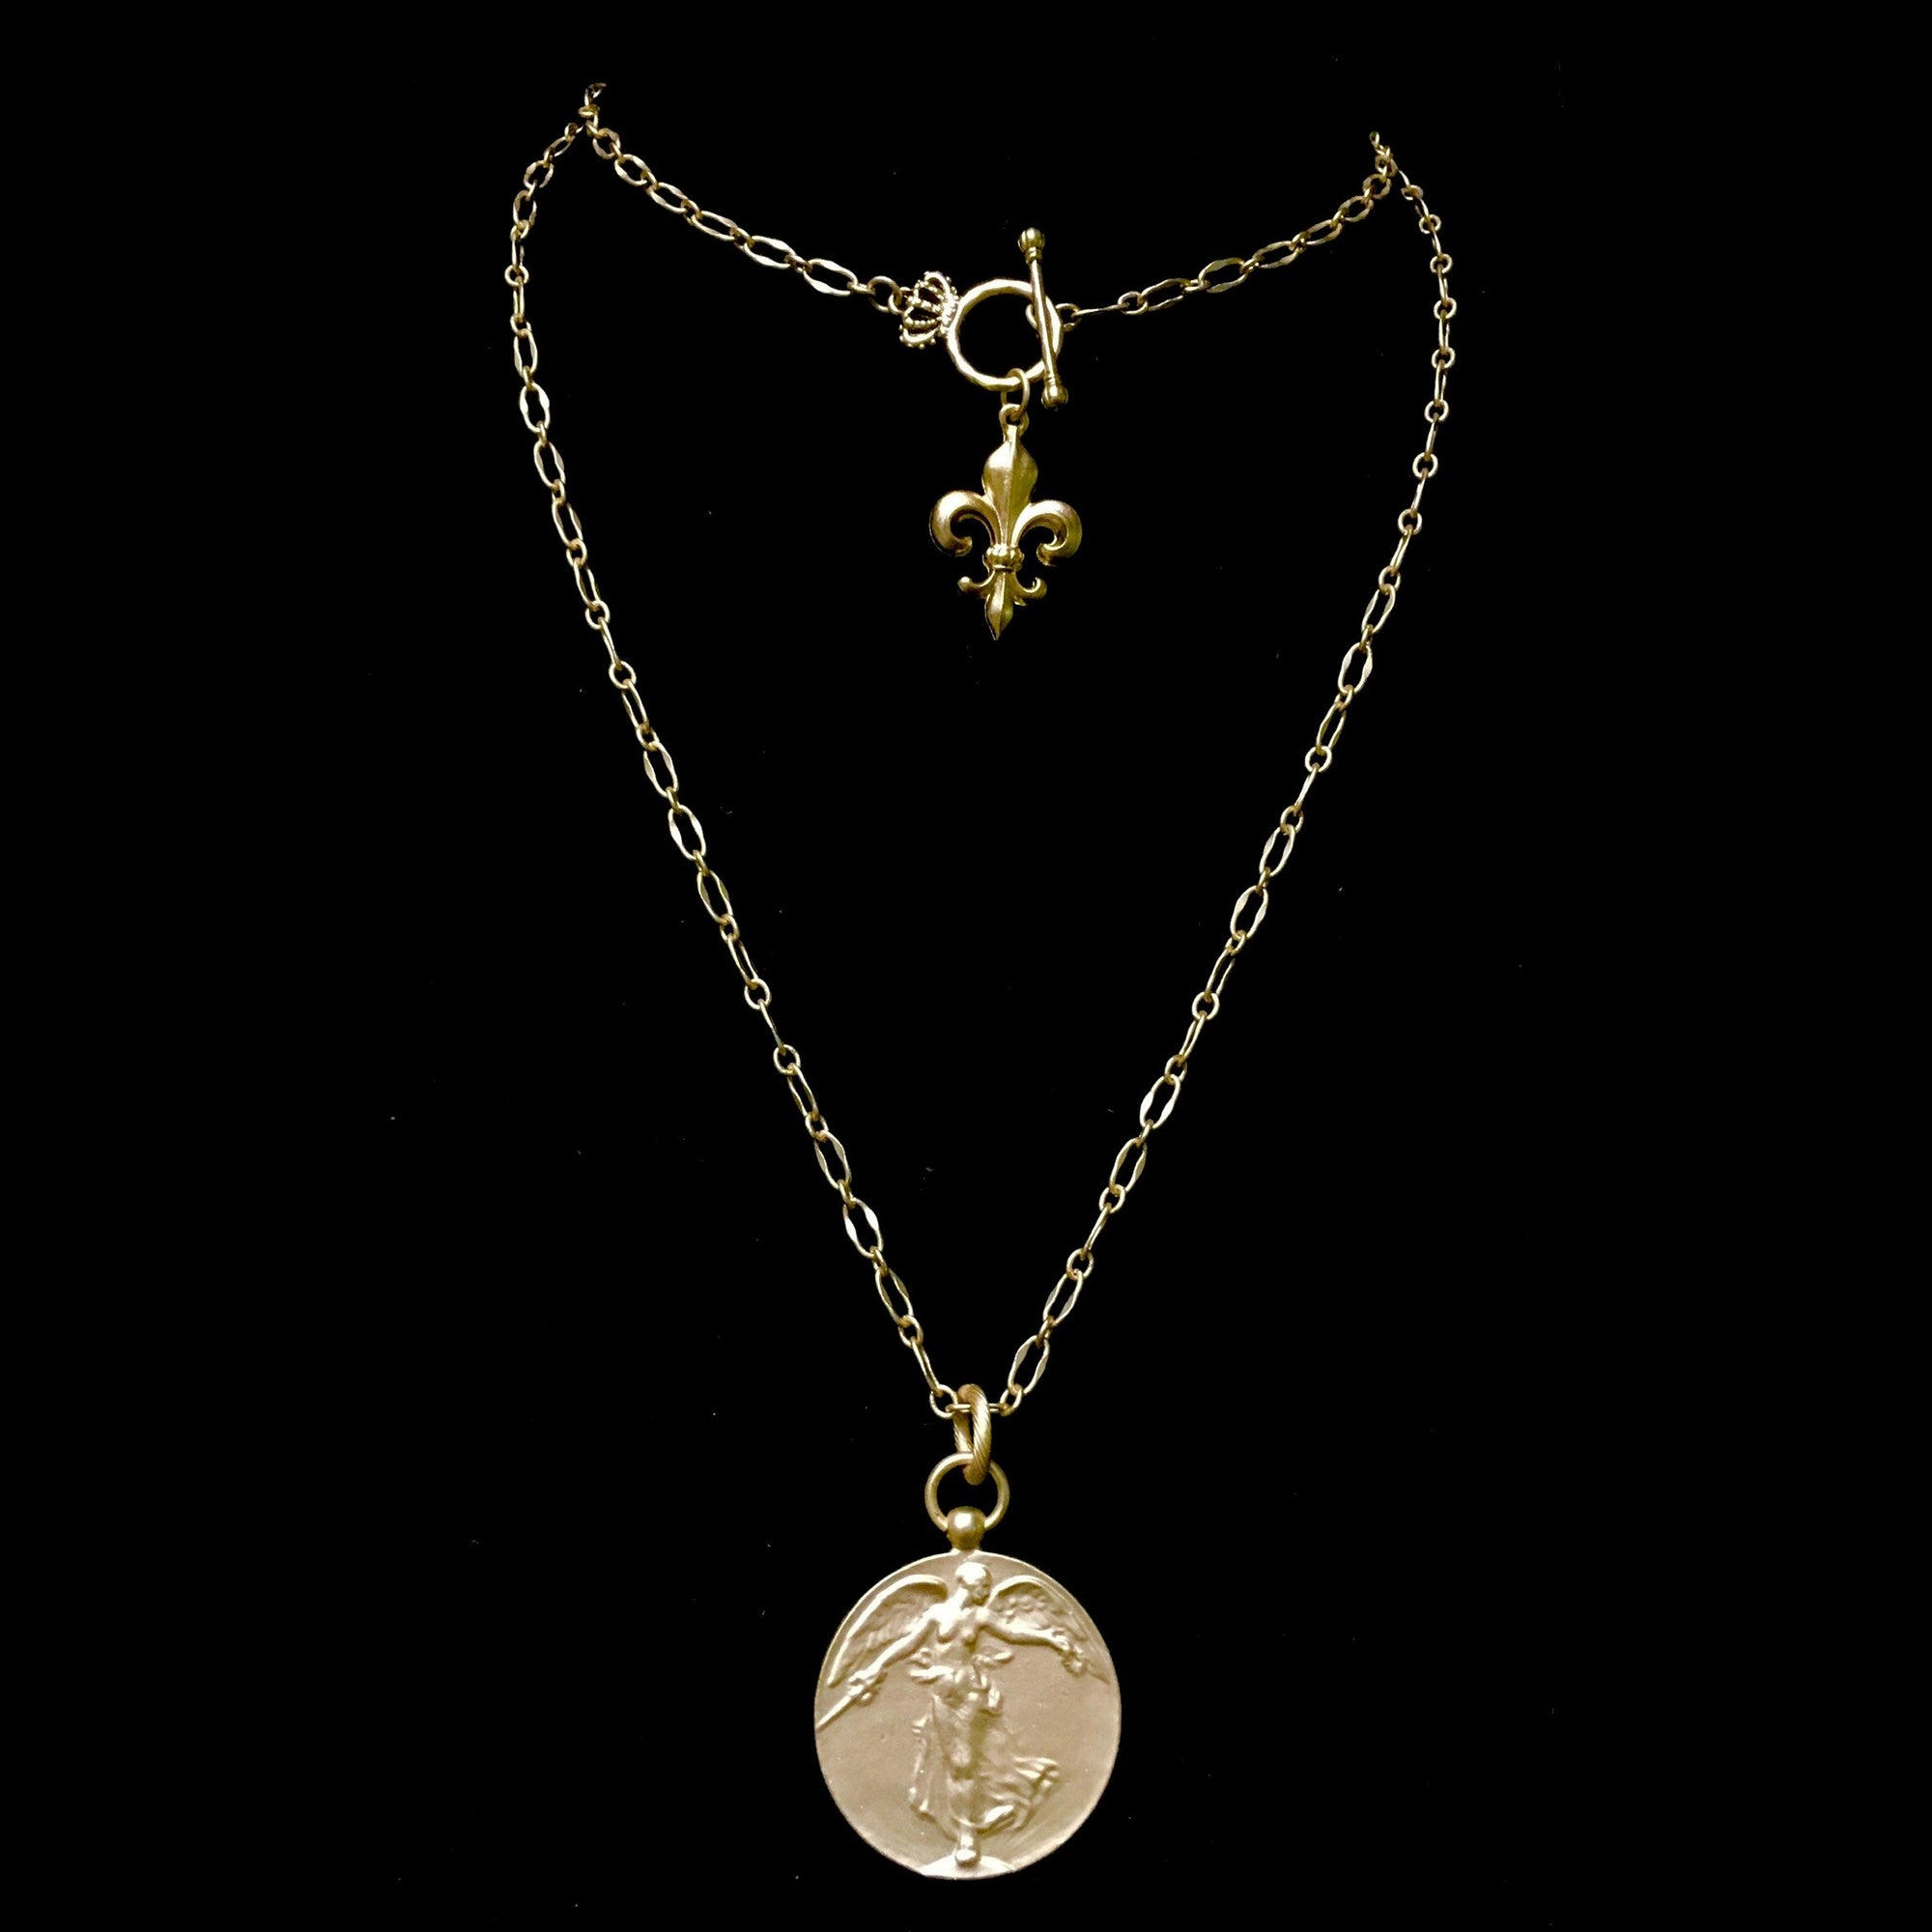 Wisdom Chain Peace Angel Chain Necklace  by Whispering Goddess - Gold